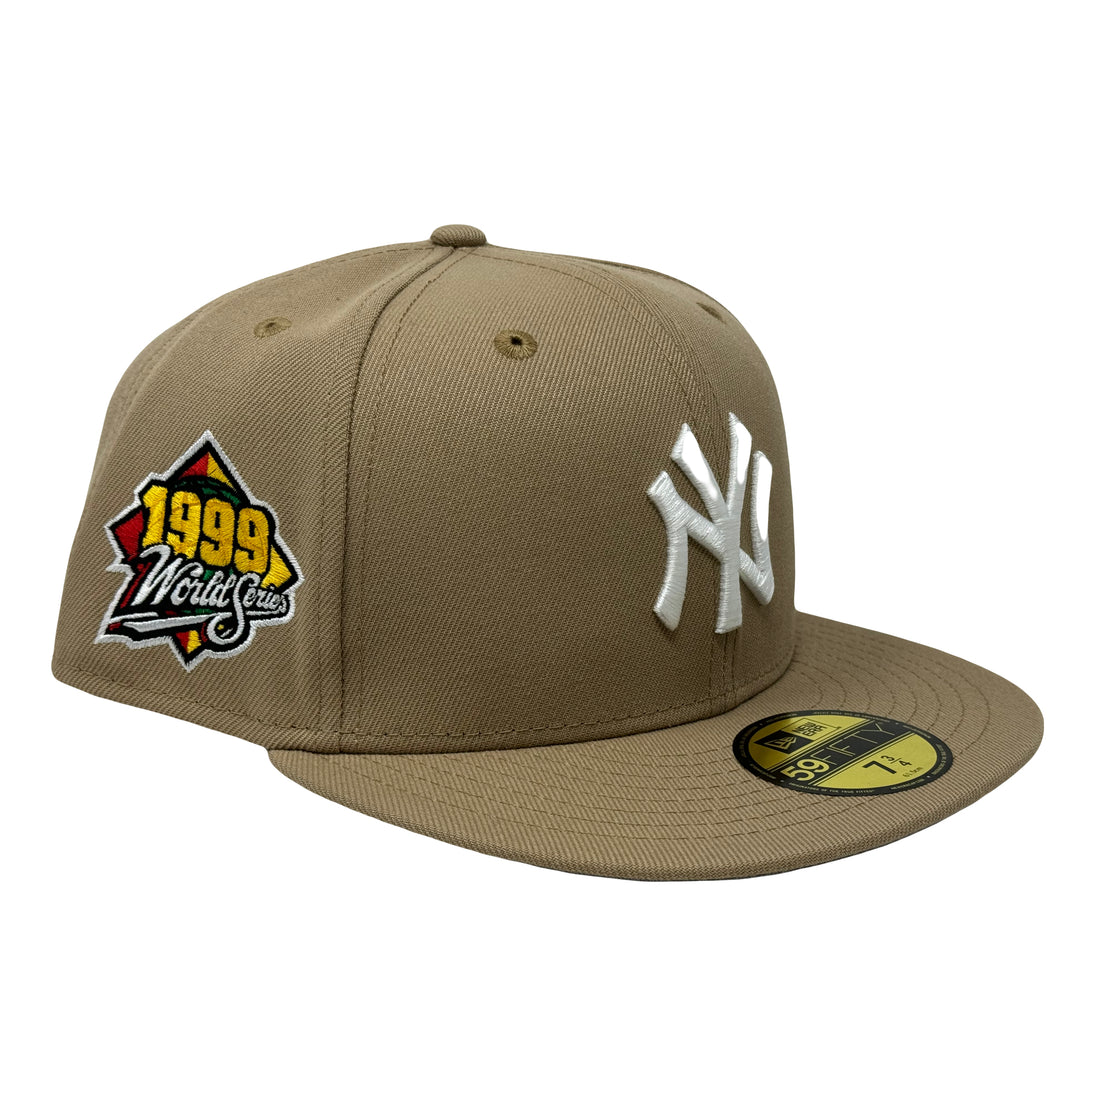 New York Yankees 1999 World Series Camel 5950 New Era Fitted Hat